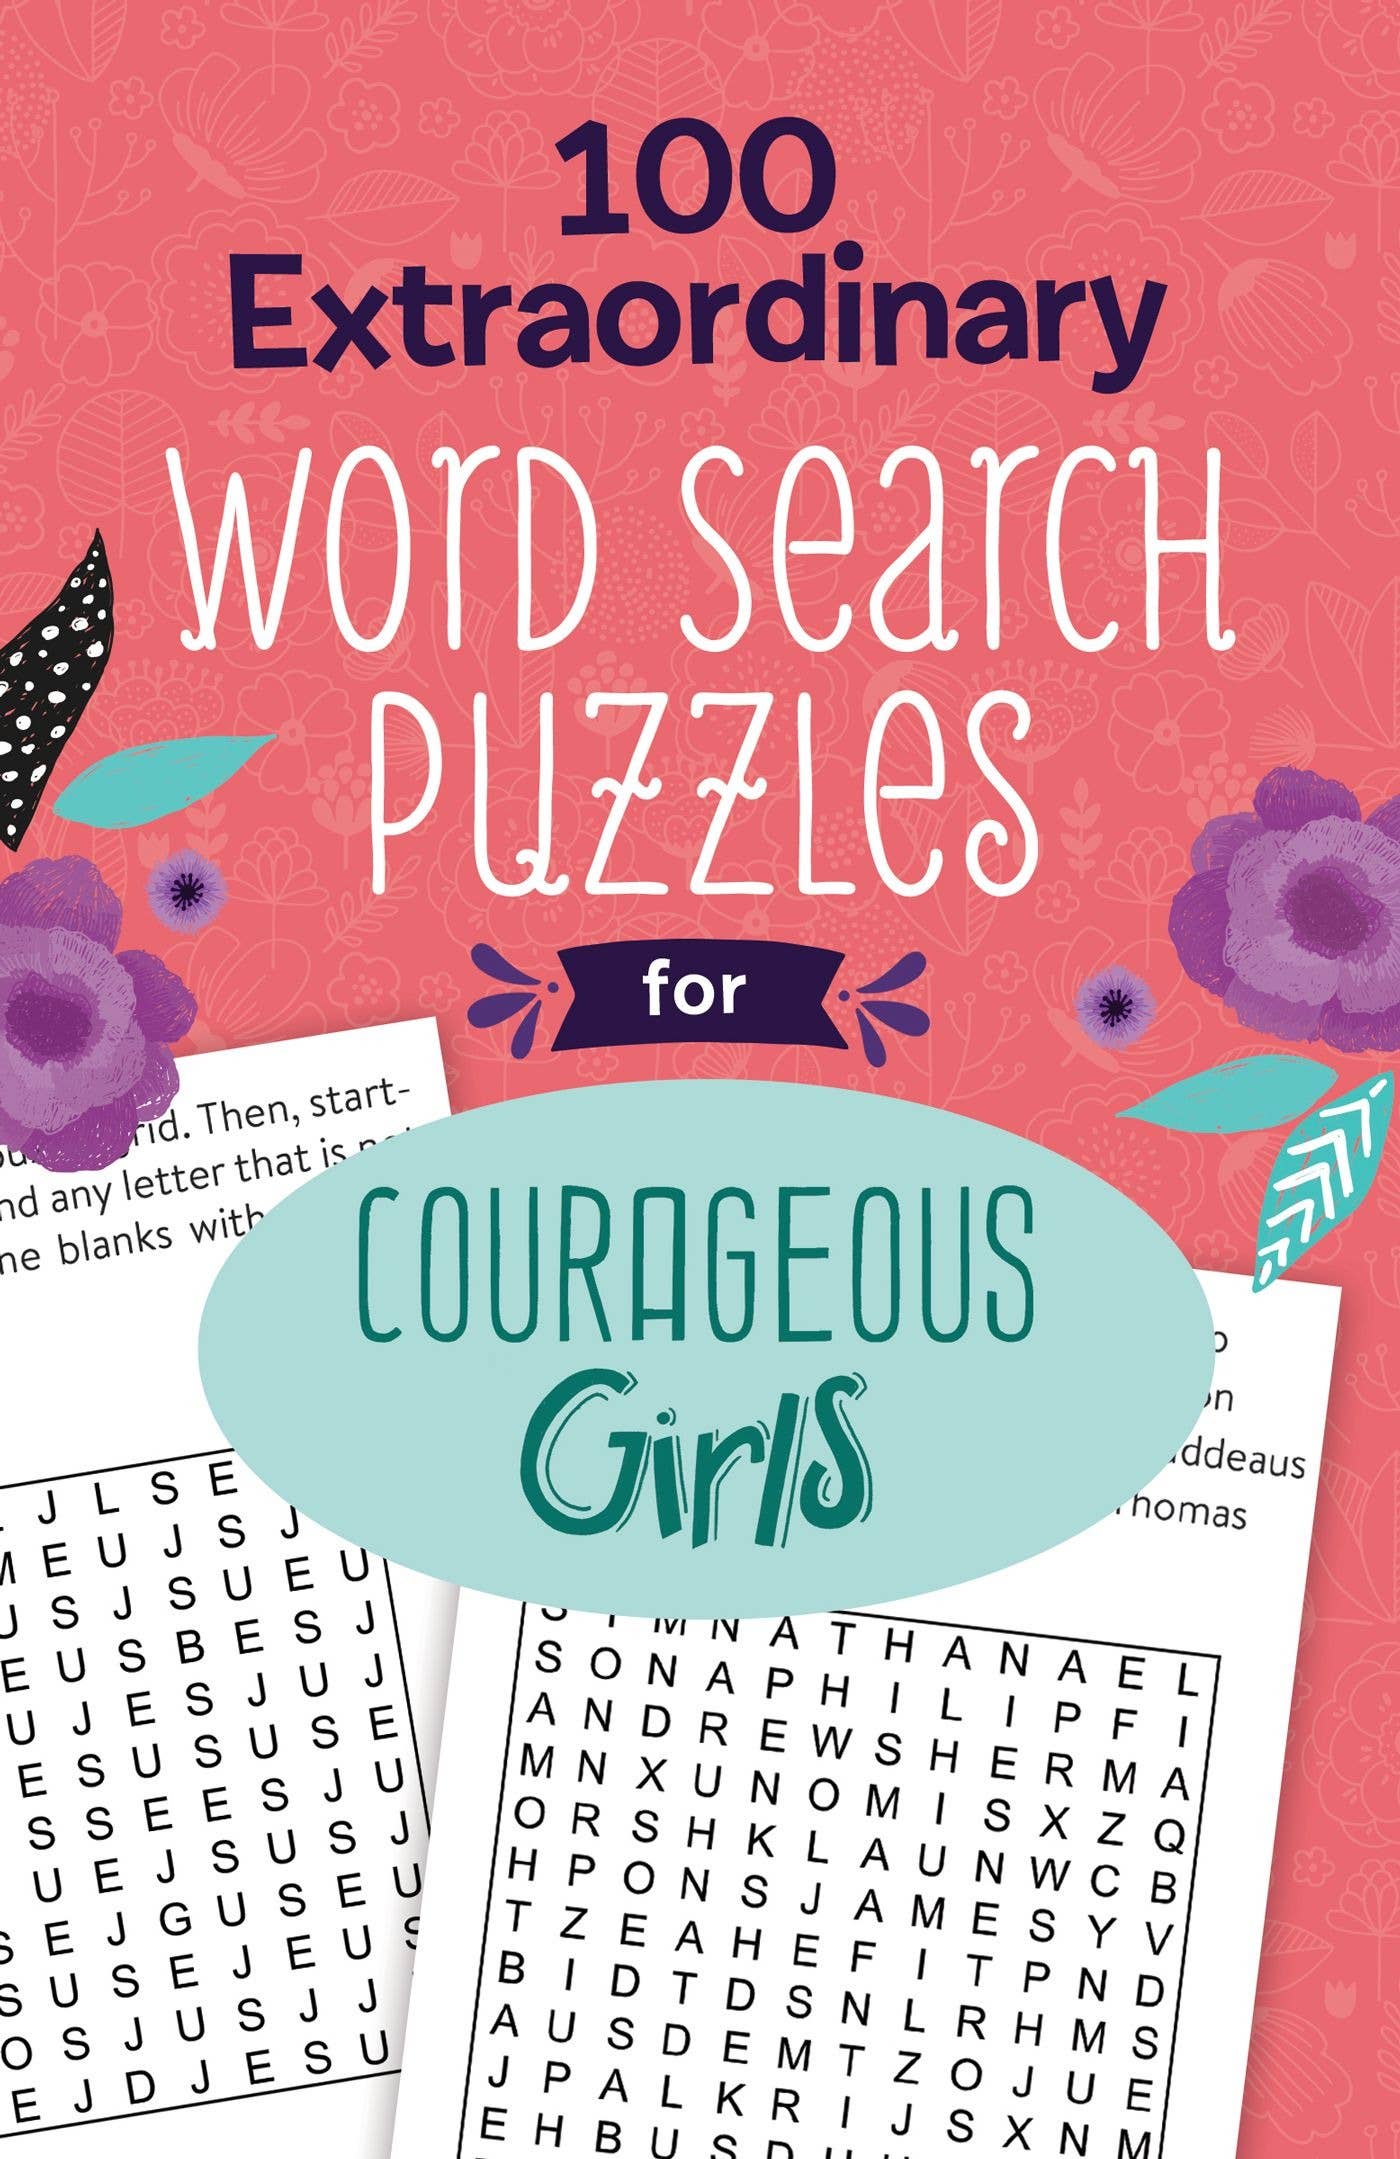 Barbour Publishing, Inc. - 100 Extraordinary Word Search Puzzles for Courageous Girls